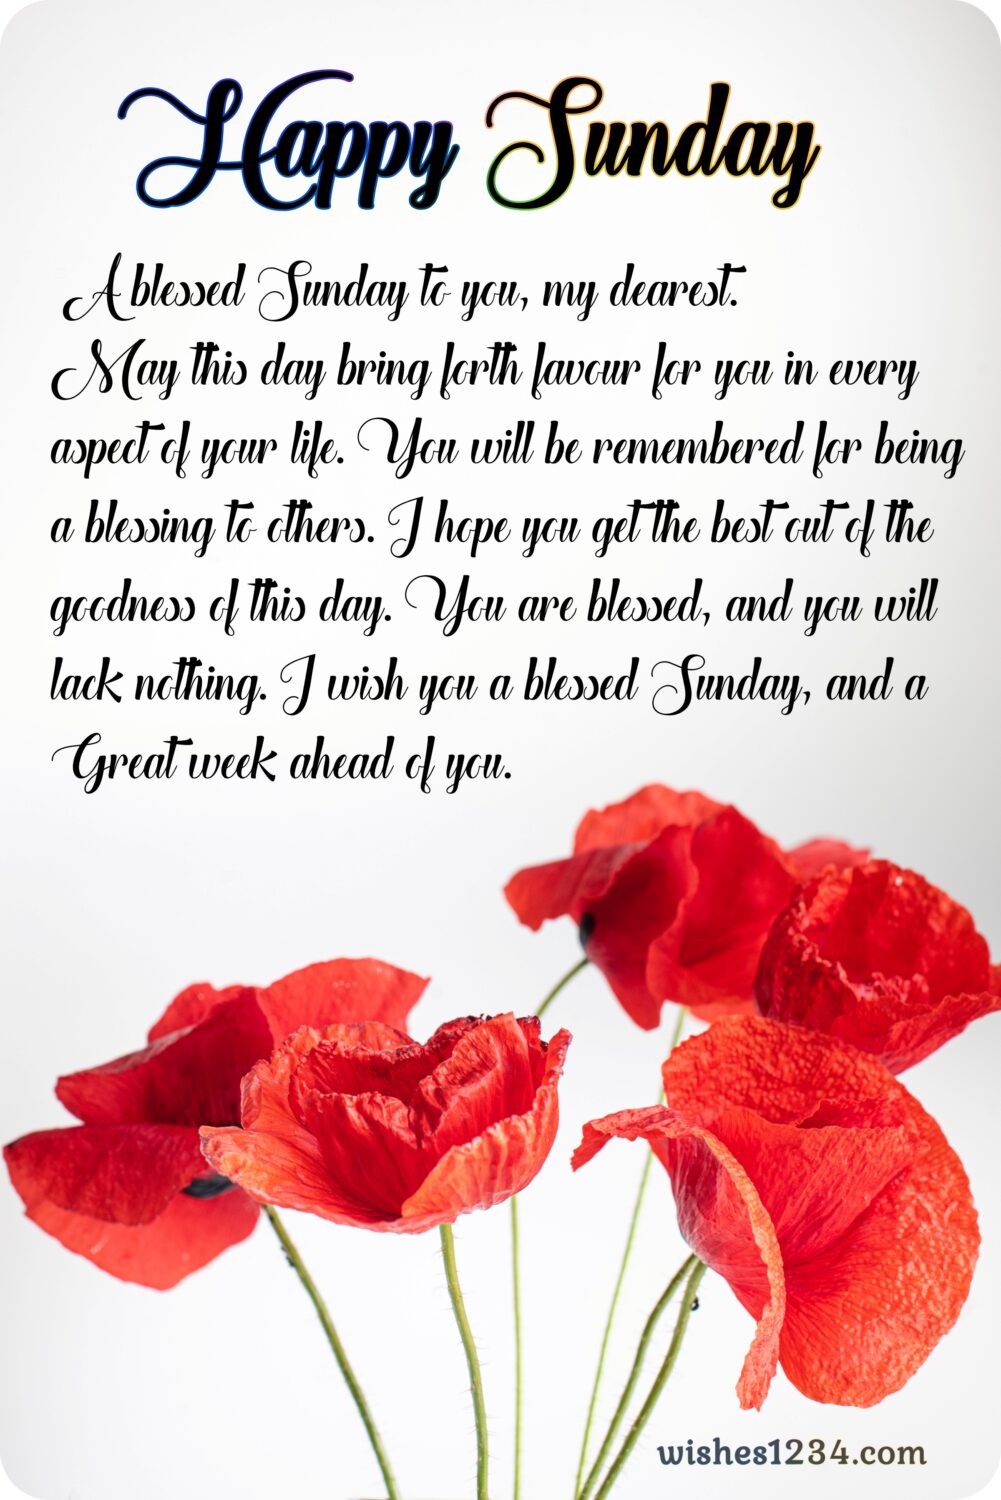 Red poppy flowers, Happy Sunday Blessings Quotes Images Pictures wishes.